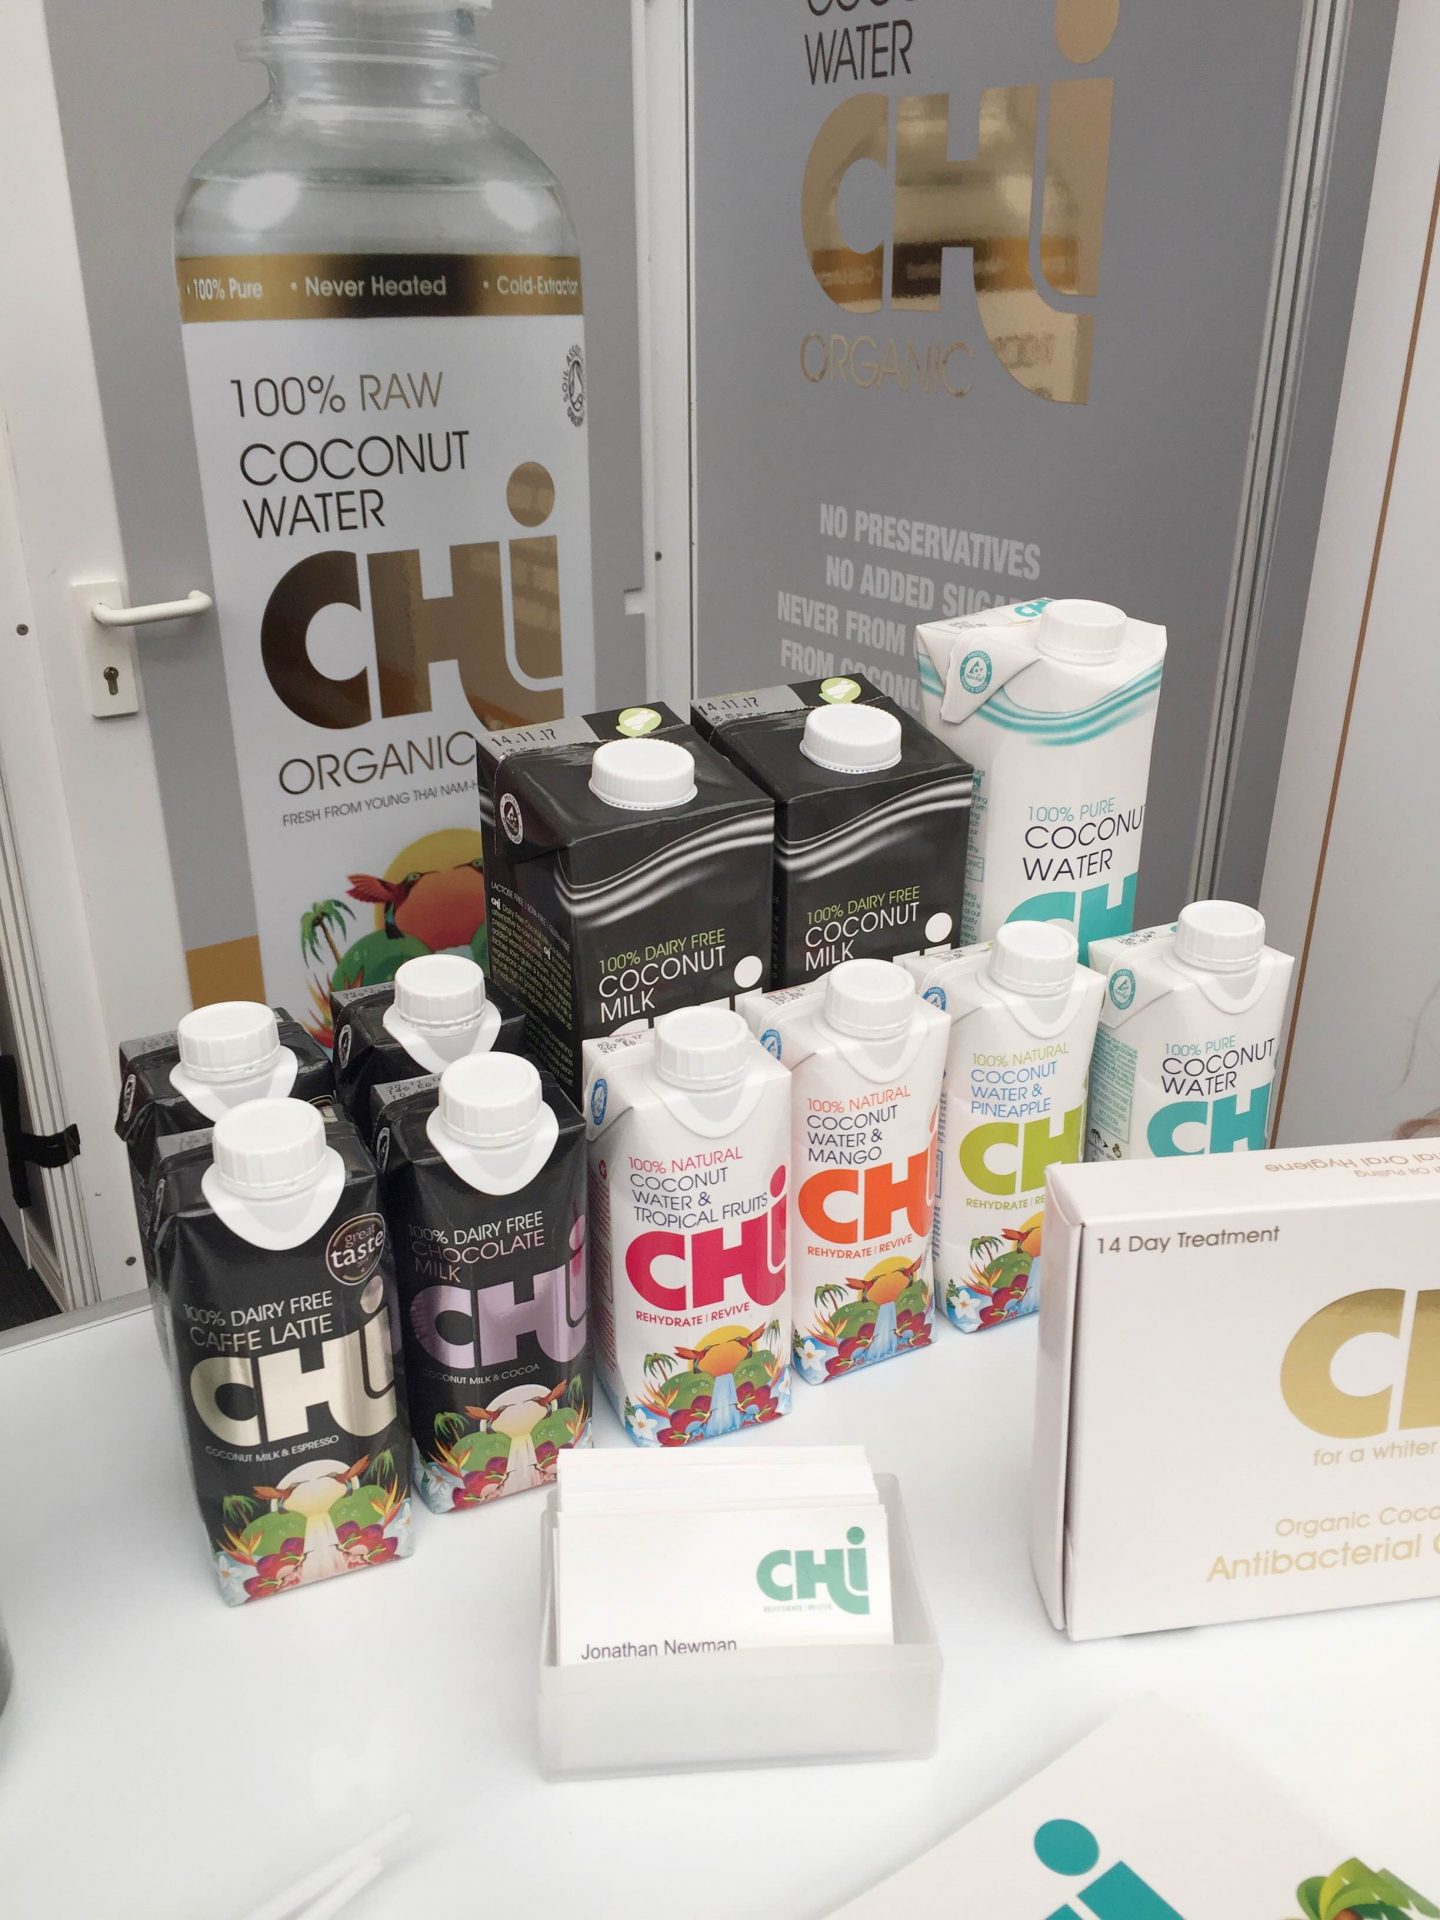 Top Insights From the Lunch Exhibition in London: From Coconut to Natural Live Cultures